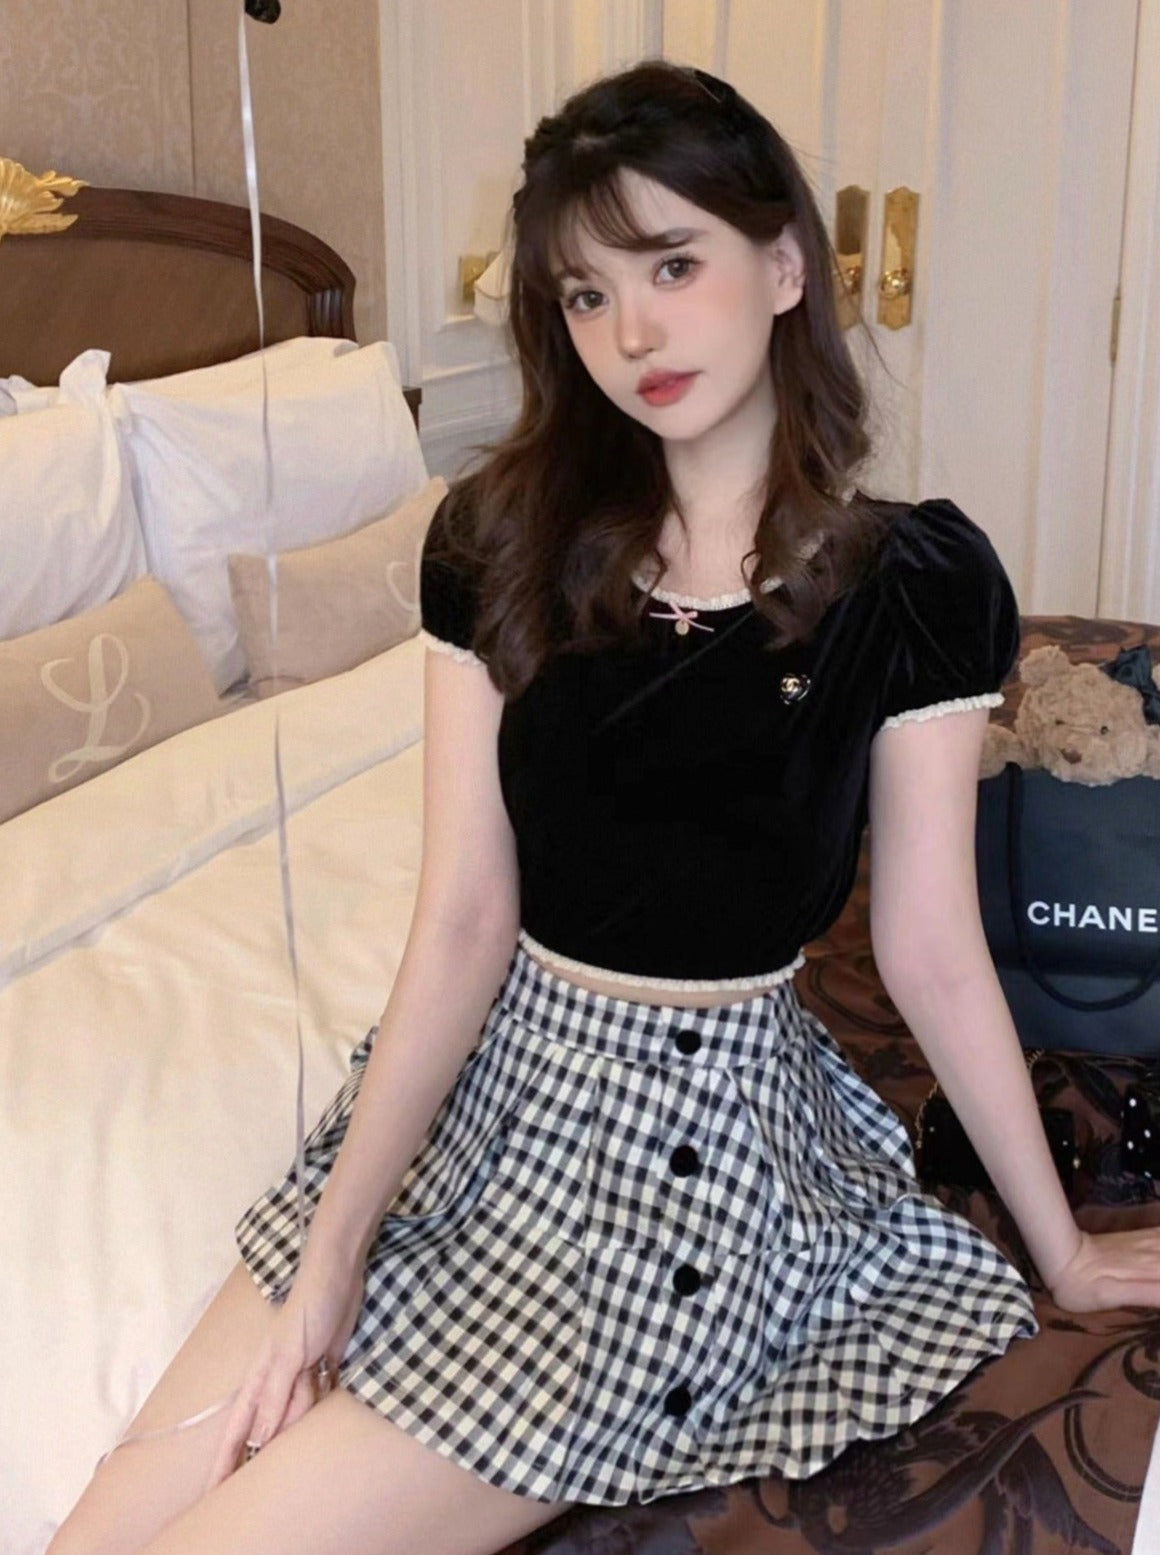 Check pleated skirt monochrome set up